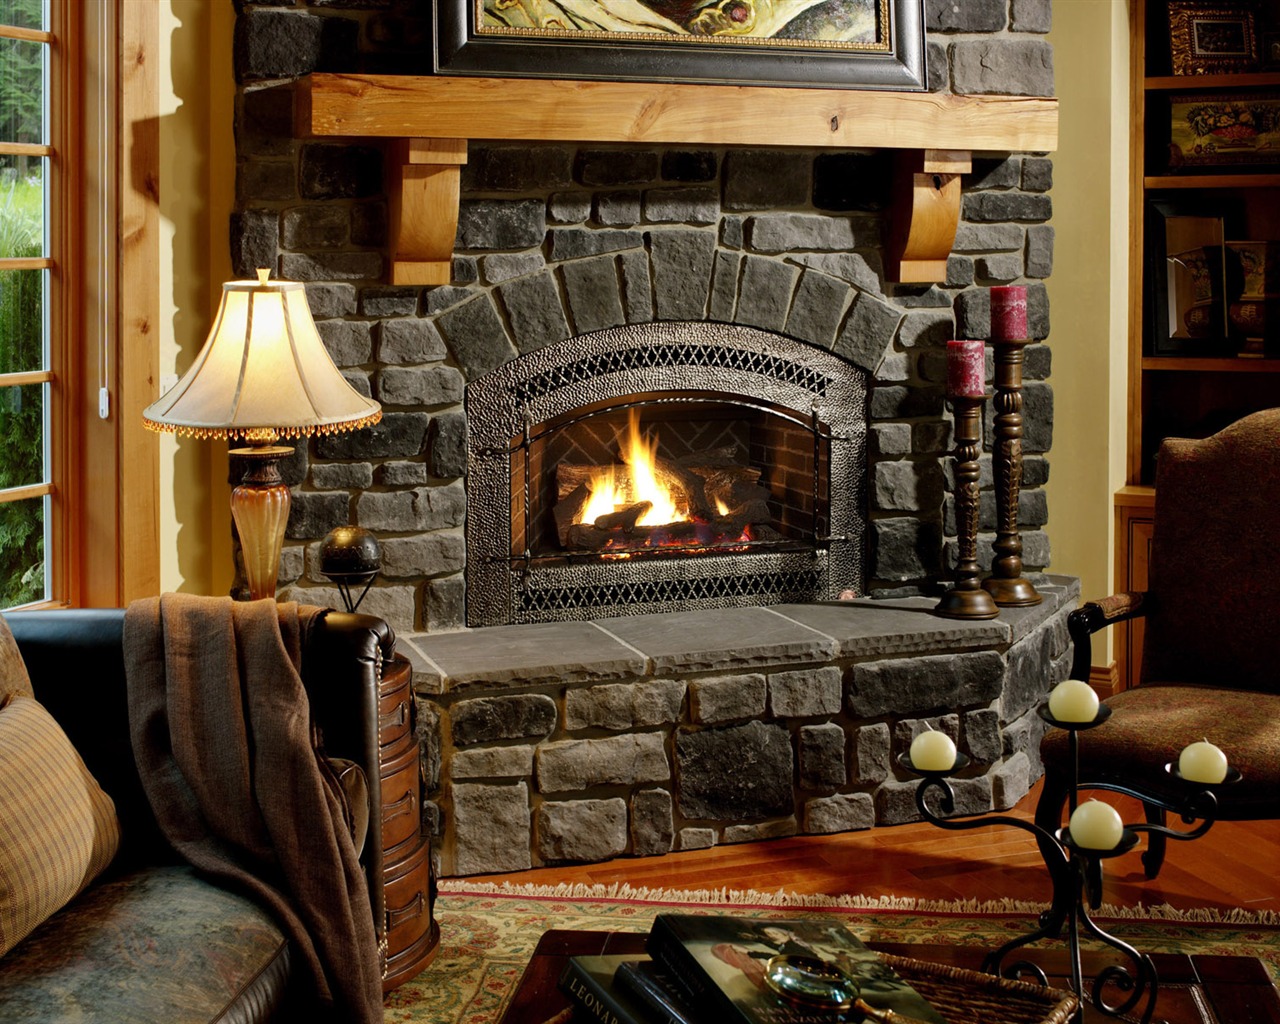 Western-style family fireplace wallpaper (1) #19 - 1280x1024